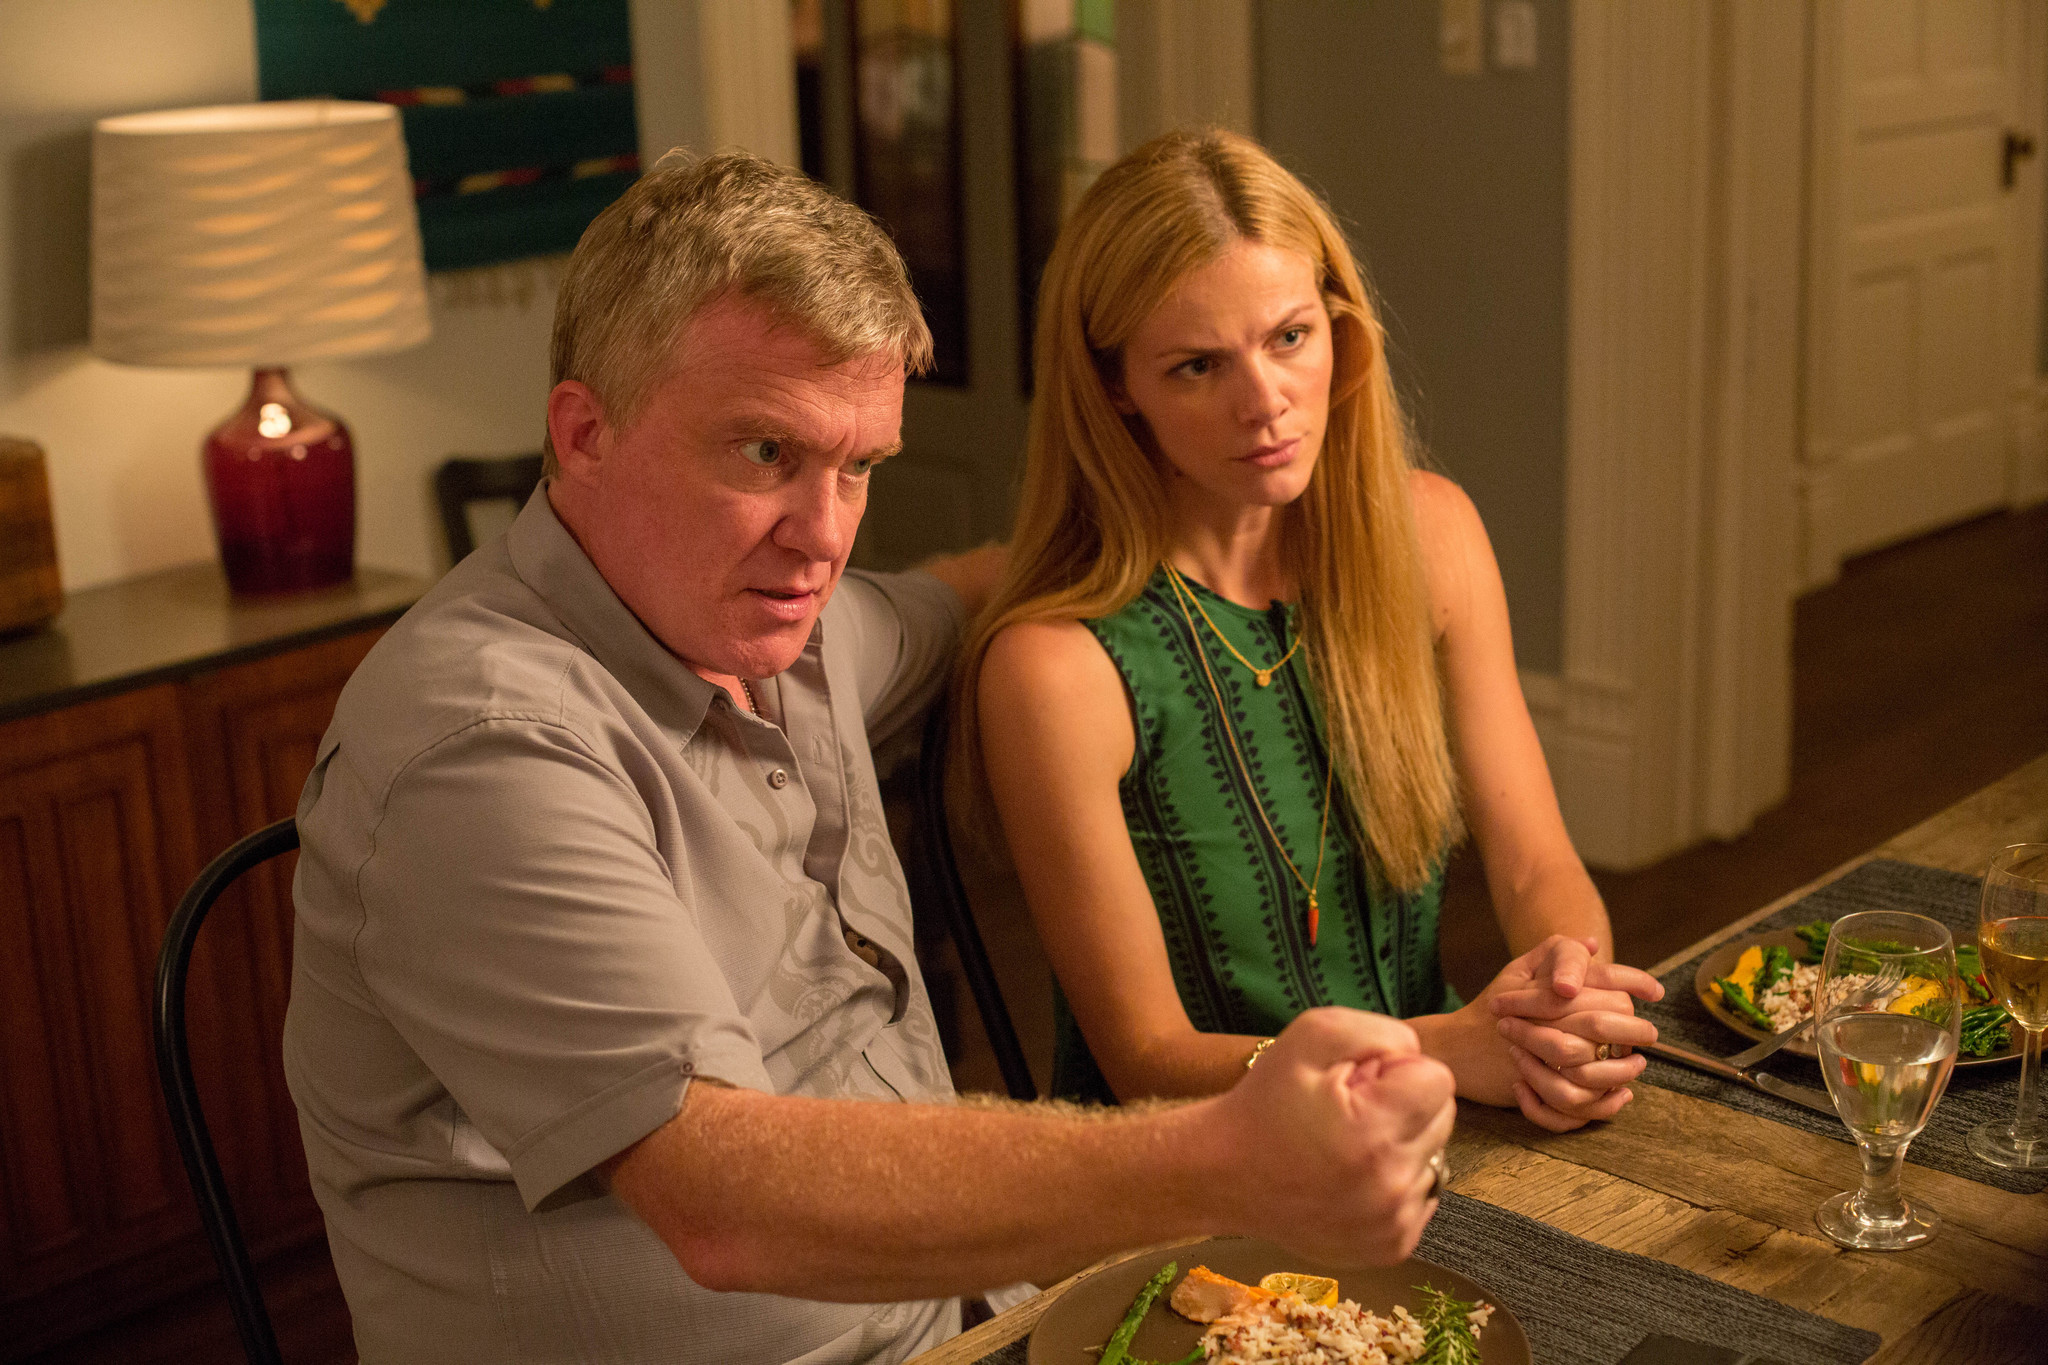 Still of Anthony Michael Hall and Brooklyn Decker in Results (2015)